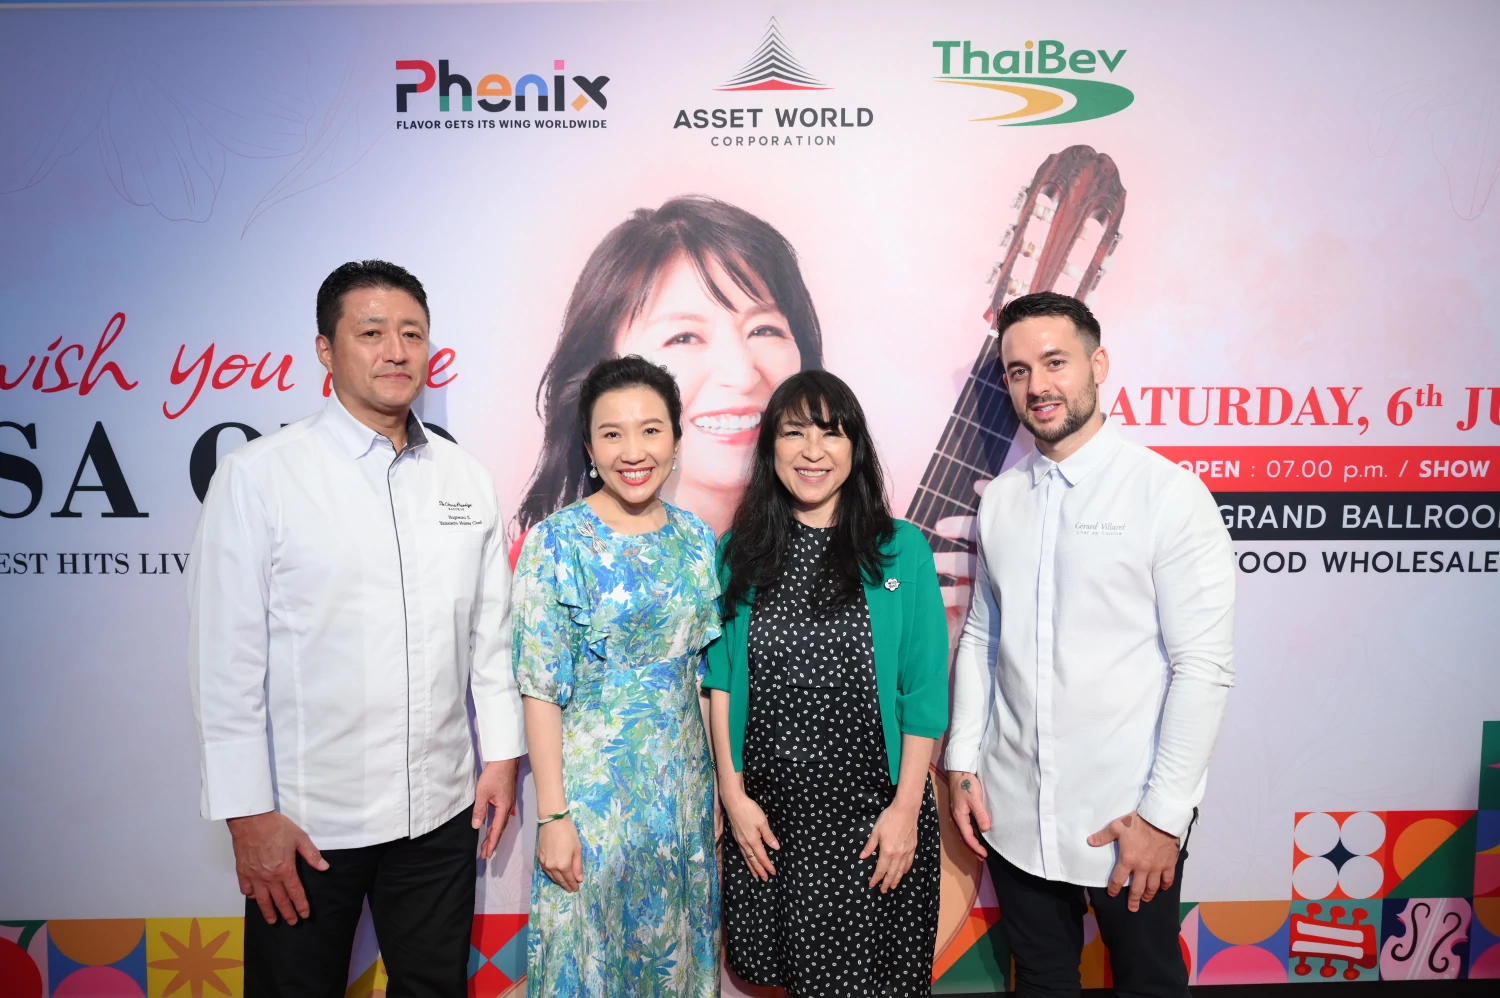 "Phenix" Project Debuts Its First World-Class Concert with Bossa Nova Queen Lisa Ono For "I Wish You Love: Lisa Ono Greatest Hits Live in Bangkok", Creating a New Lifestyle Space in the Heart of Bangkok